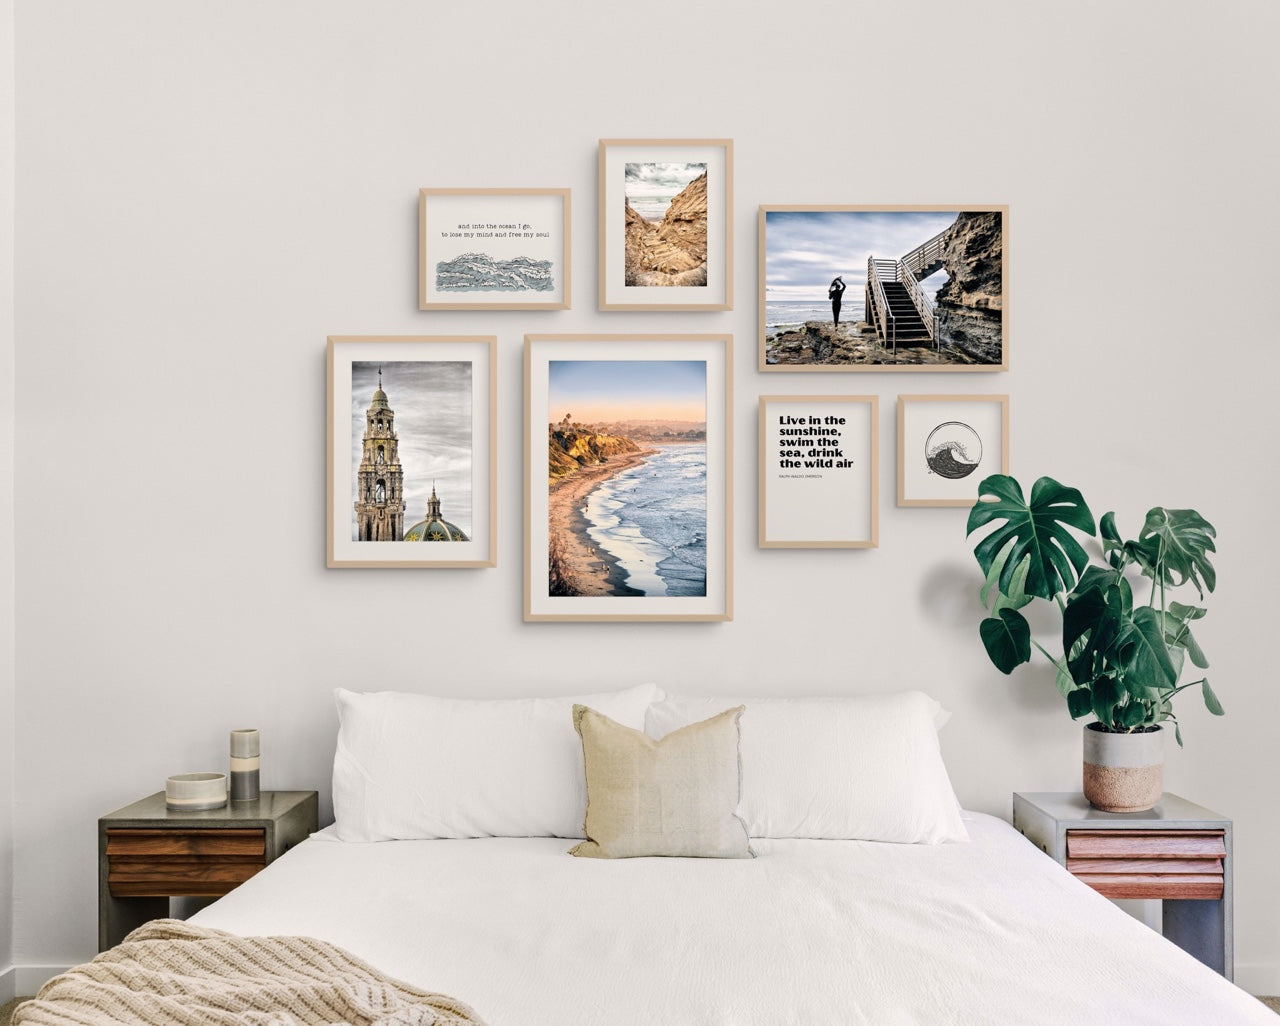 San Diego Vibes Gallery Wall  7 Piece Art Set - MK Envision Galleries